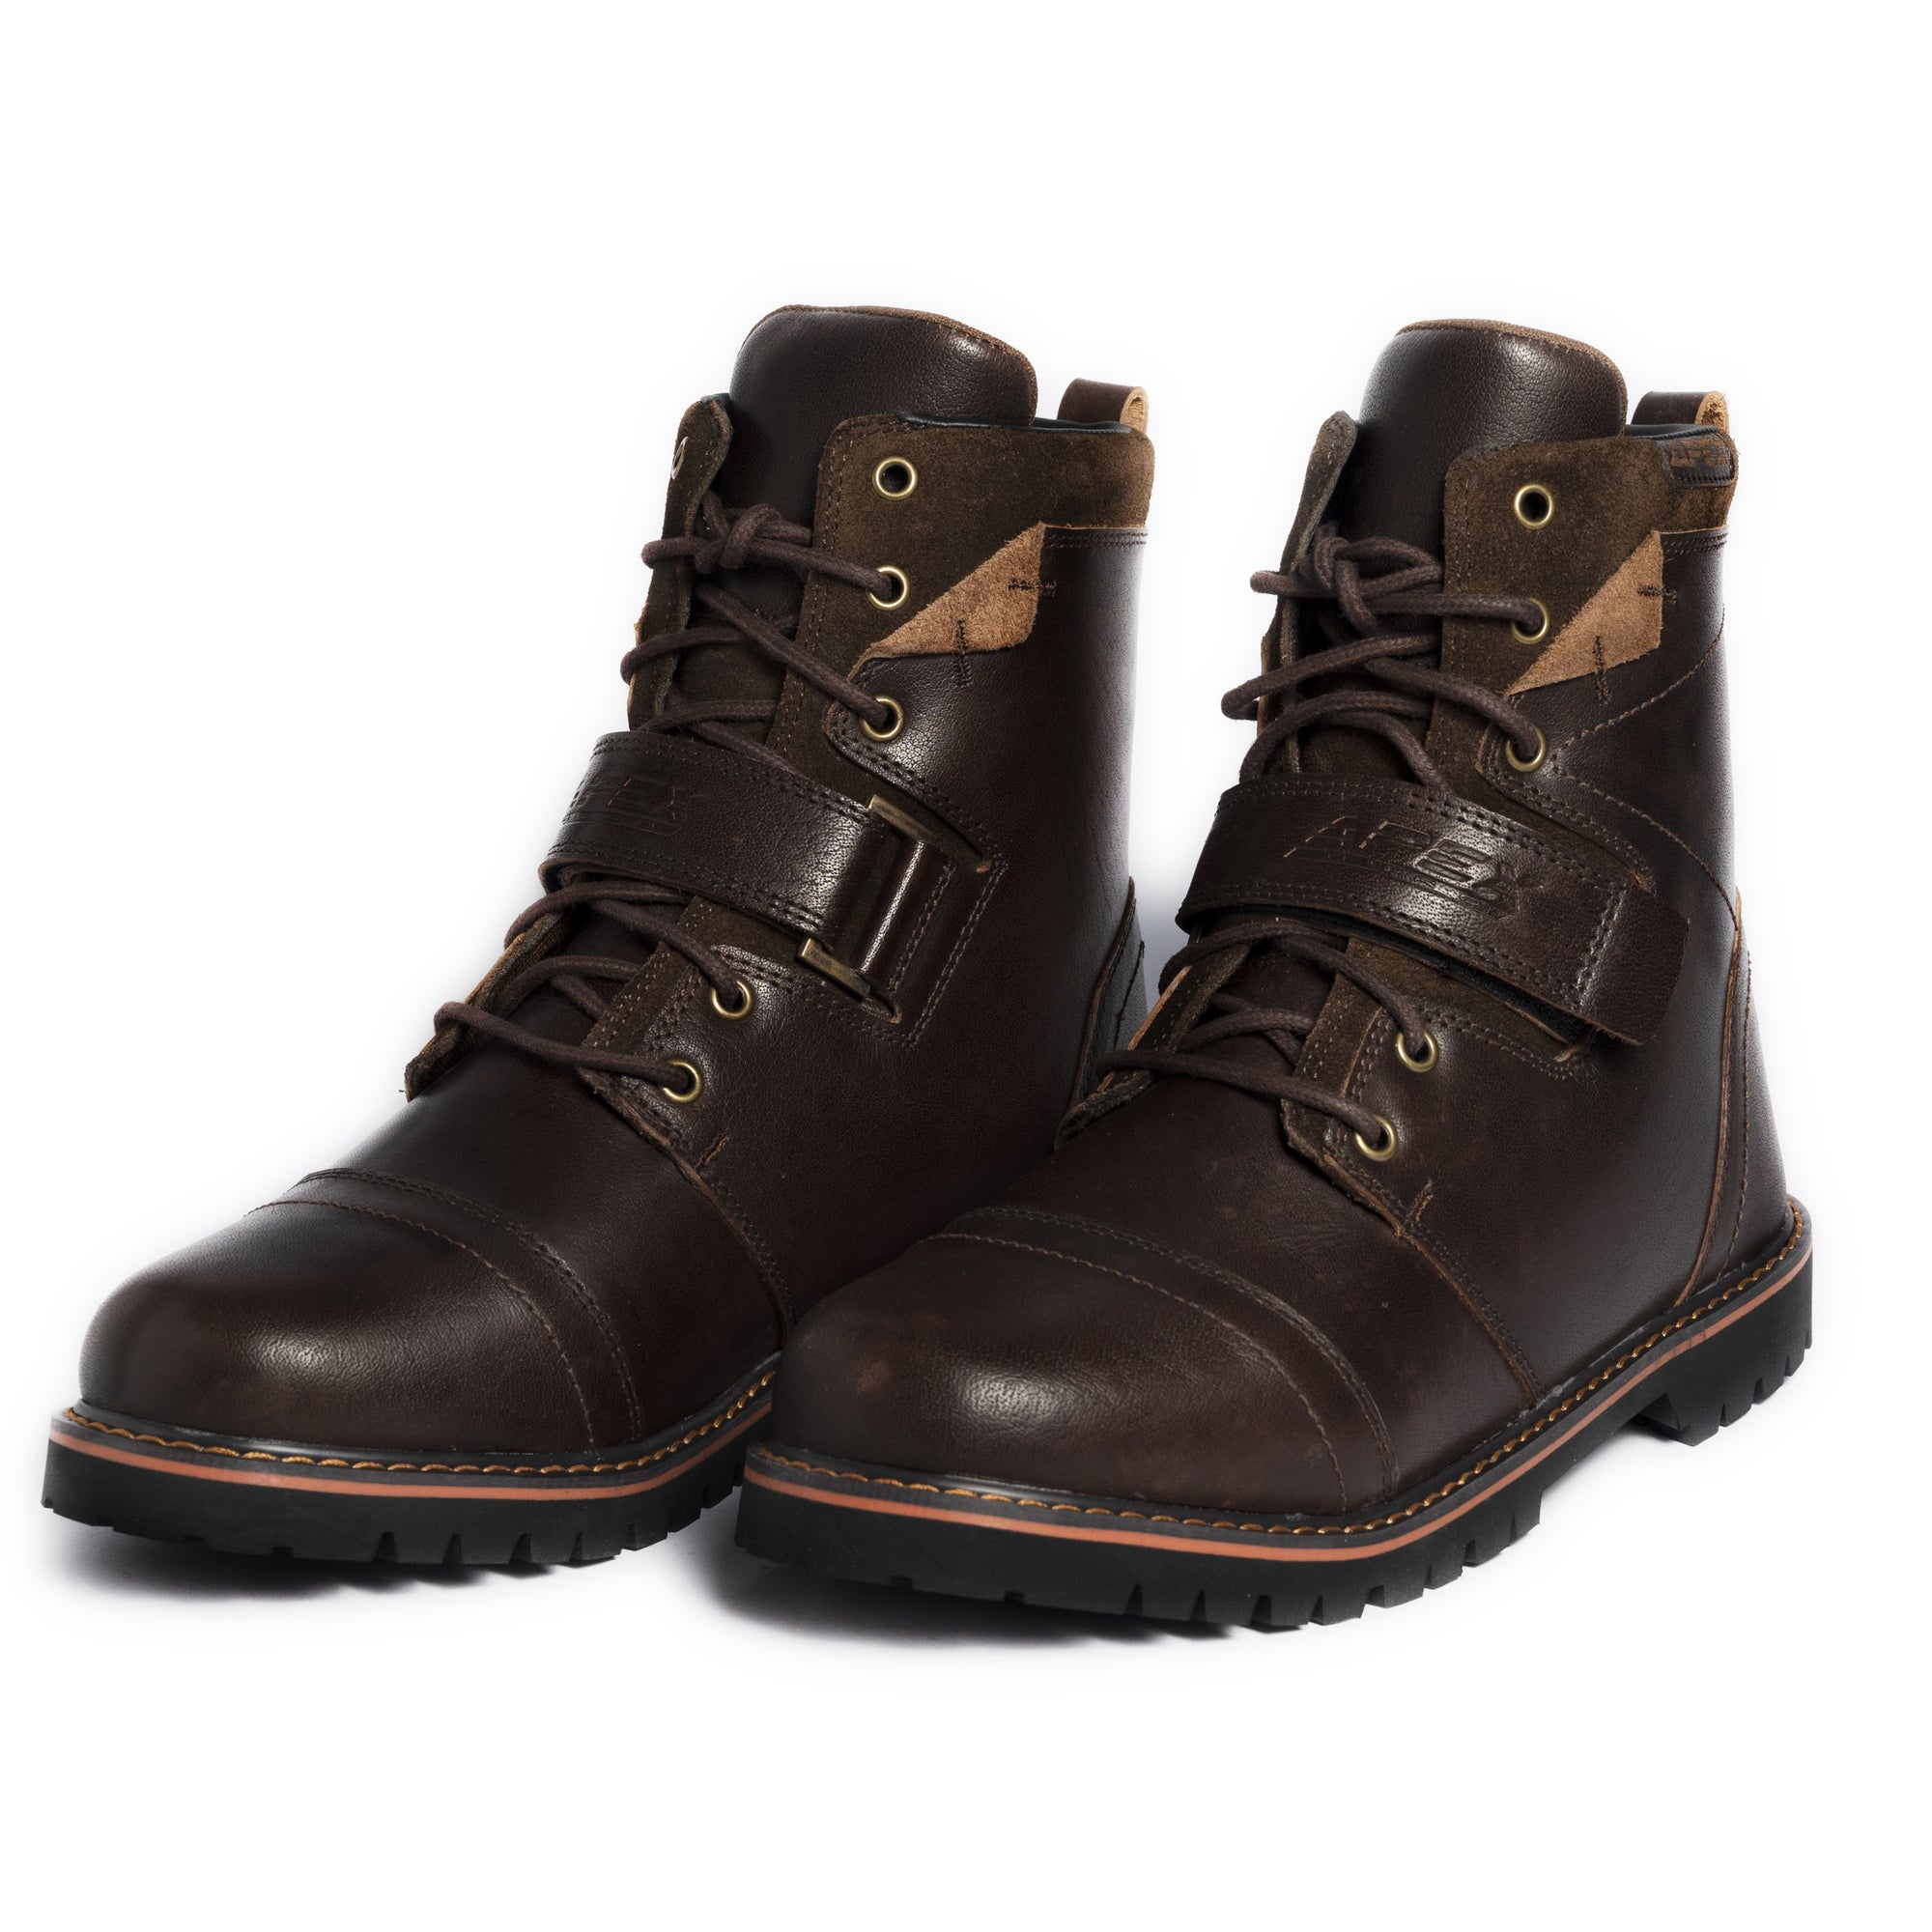 Patron Leather men’s motorcycle boot